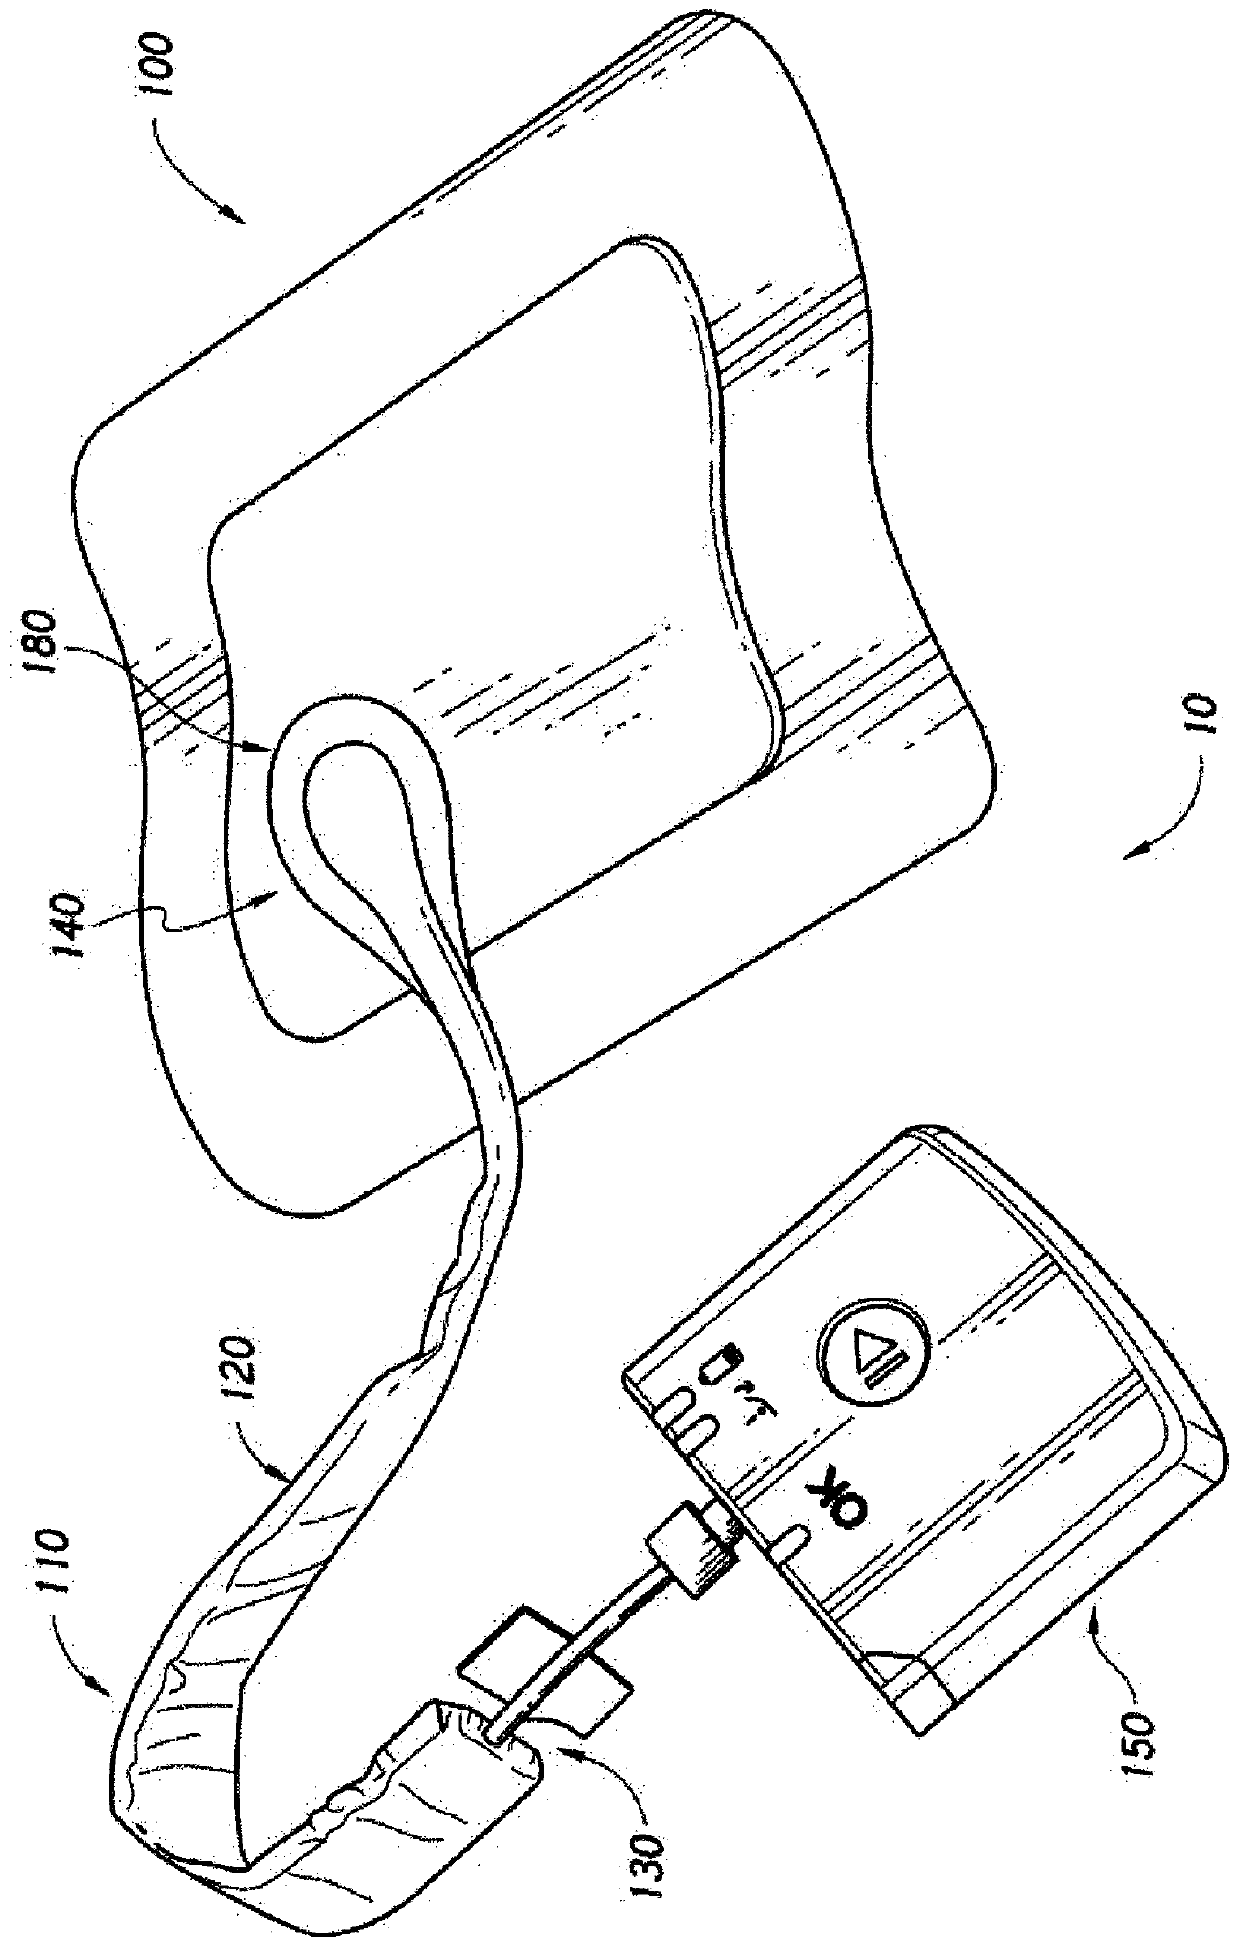 Positioning of sensors for sensor enabled wound monitoring or therapy